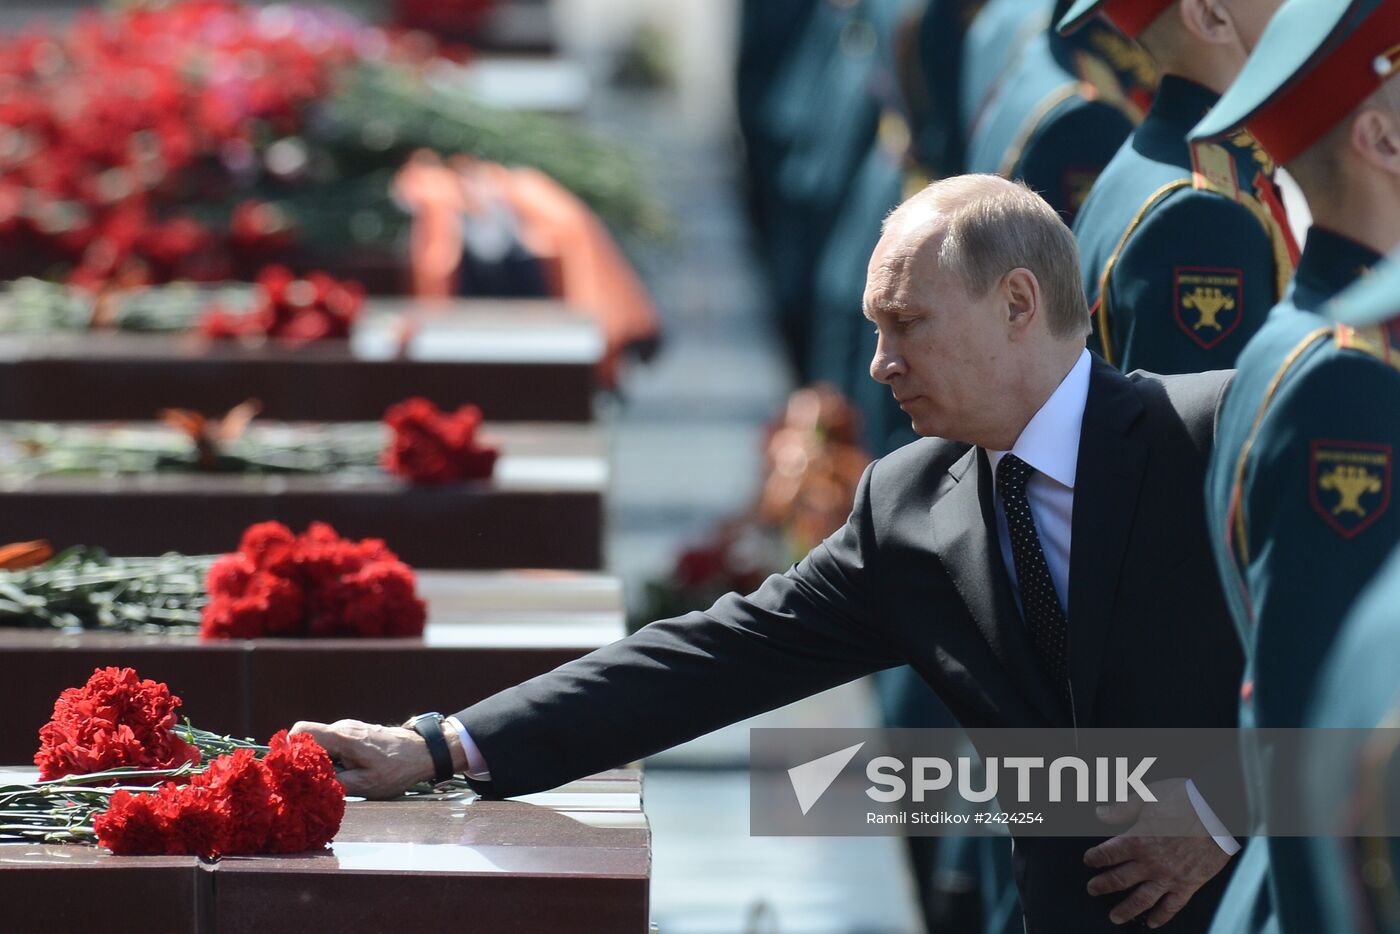 Wreath and flowers laid at Tomb of Unknown Soldier near Kremlin wall